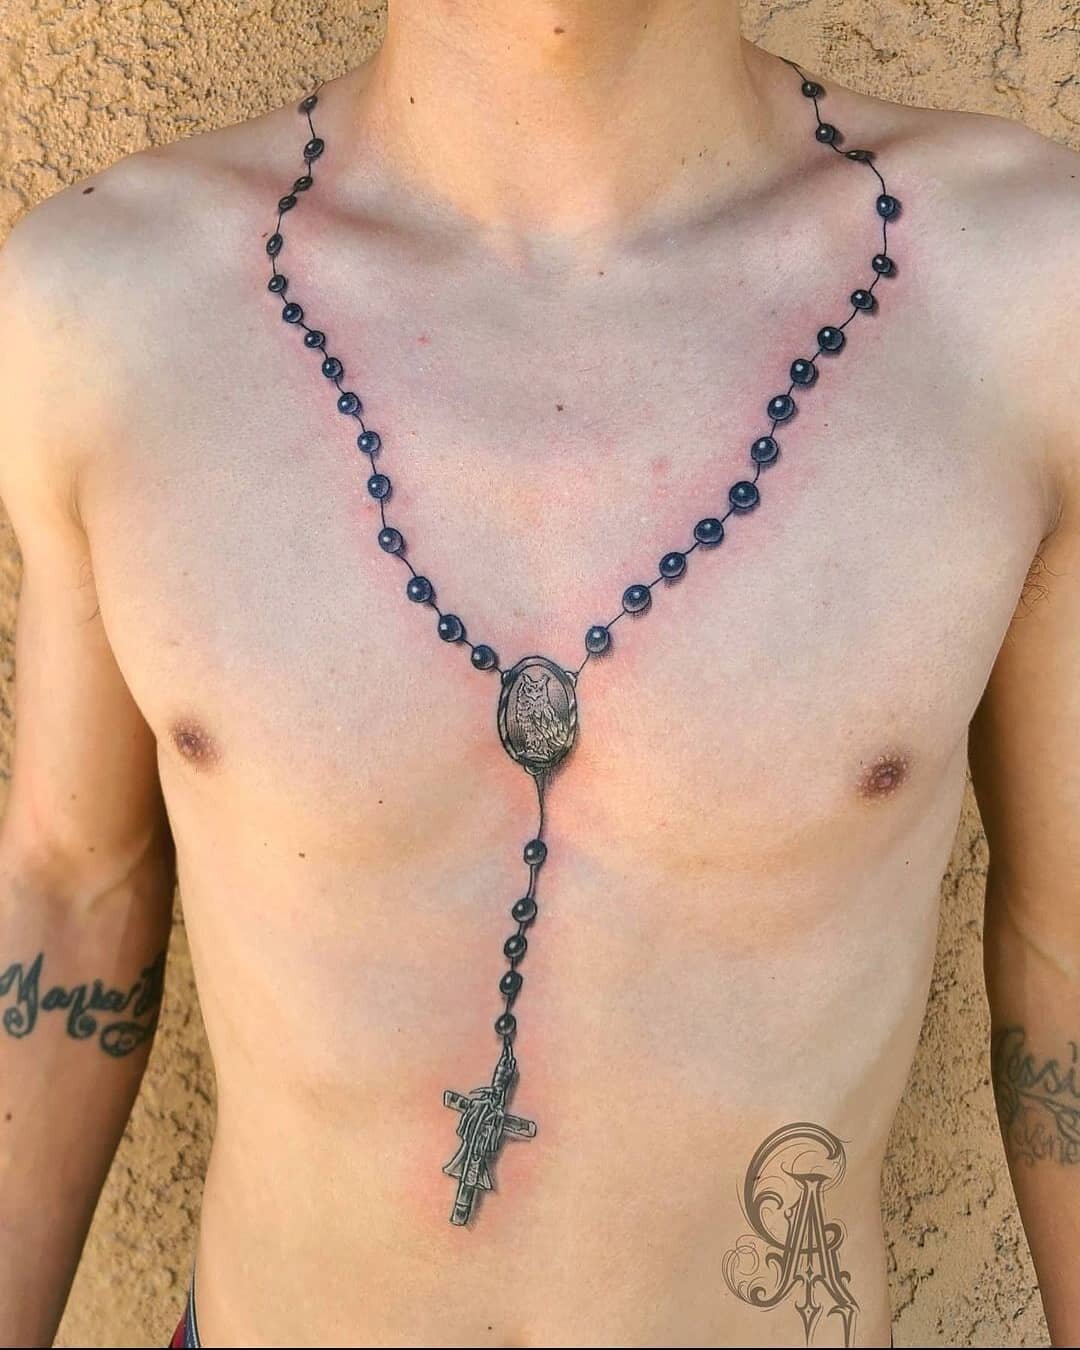 Rosary by @christopher__aguirre #tattoo #tattoos #tats #anthemsbodyarts #anthemsredding #anthems #reddingtattoos #redding #downtownredding #tattooshop #bodyart #inked #customtattoos #customtattoo #blackandgraytattoo #blackandwhitetattoo #rosarytattoo